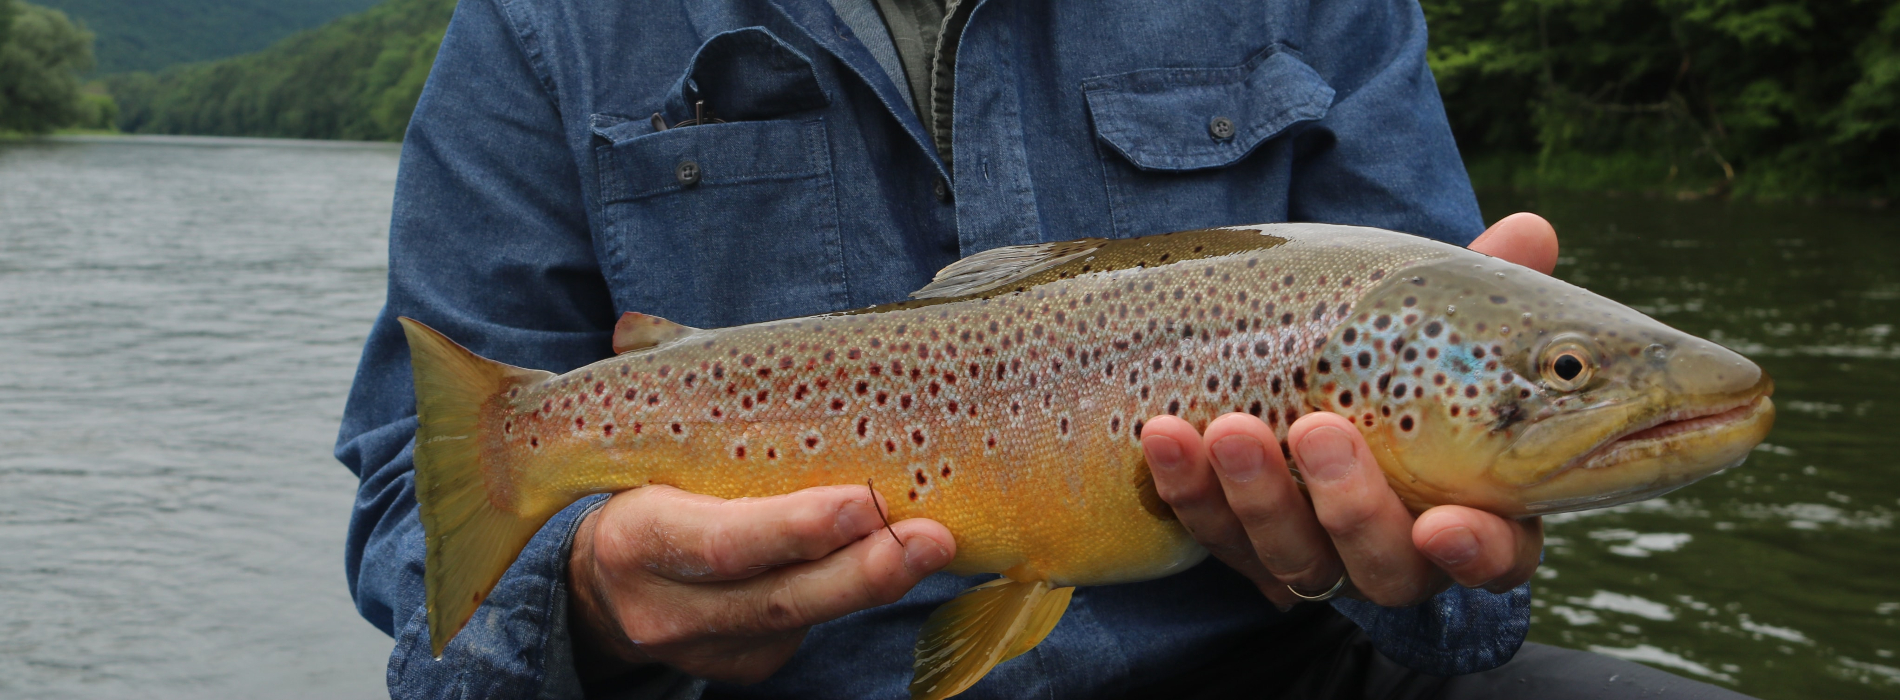 Berkshire Rivers Fly Fishing | Learn To Fly Fish, Western Massachusetts